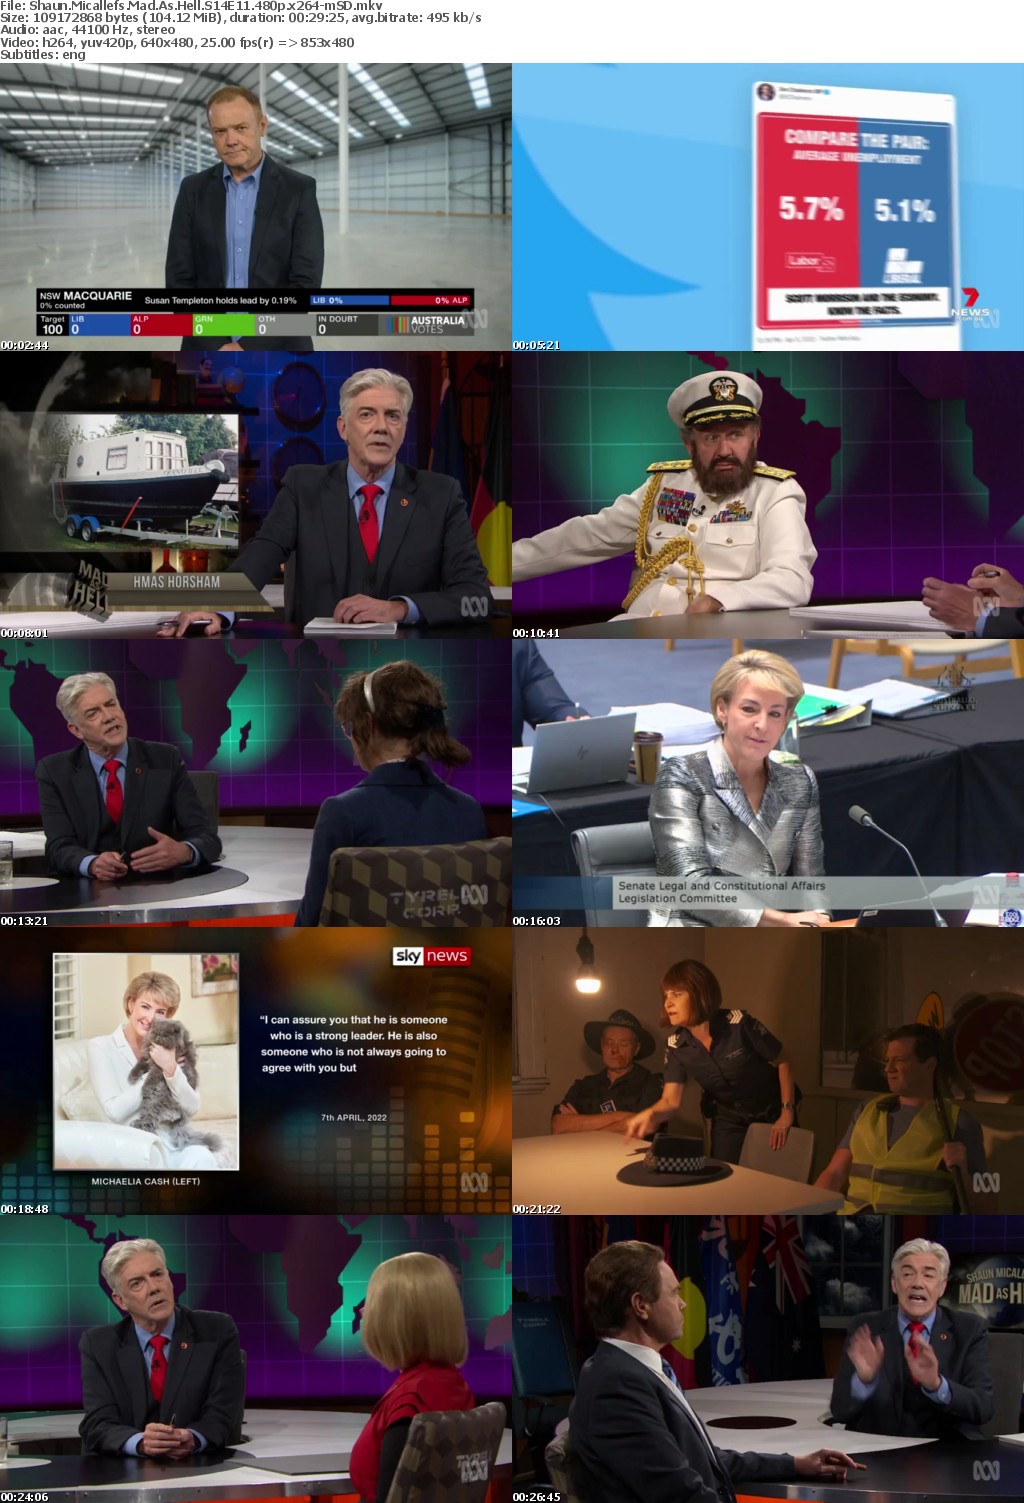 Shaun Micallefs Mad As Hell S14E11 480p x264-mSD